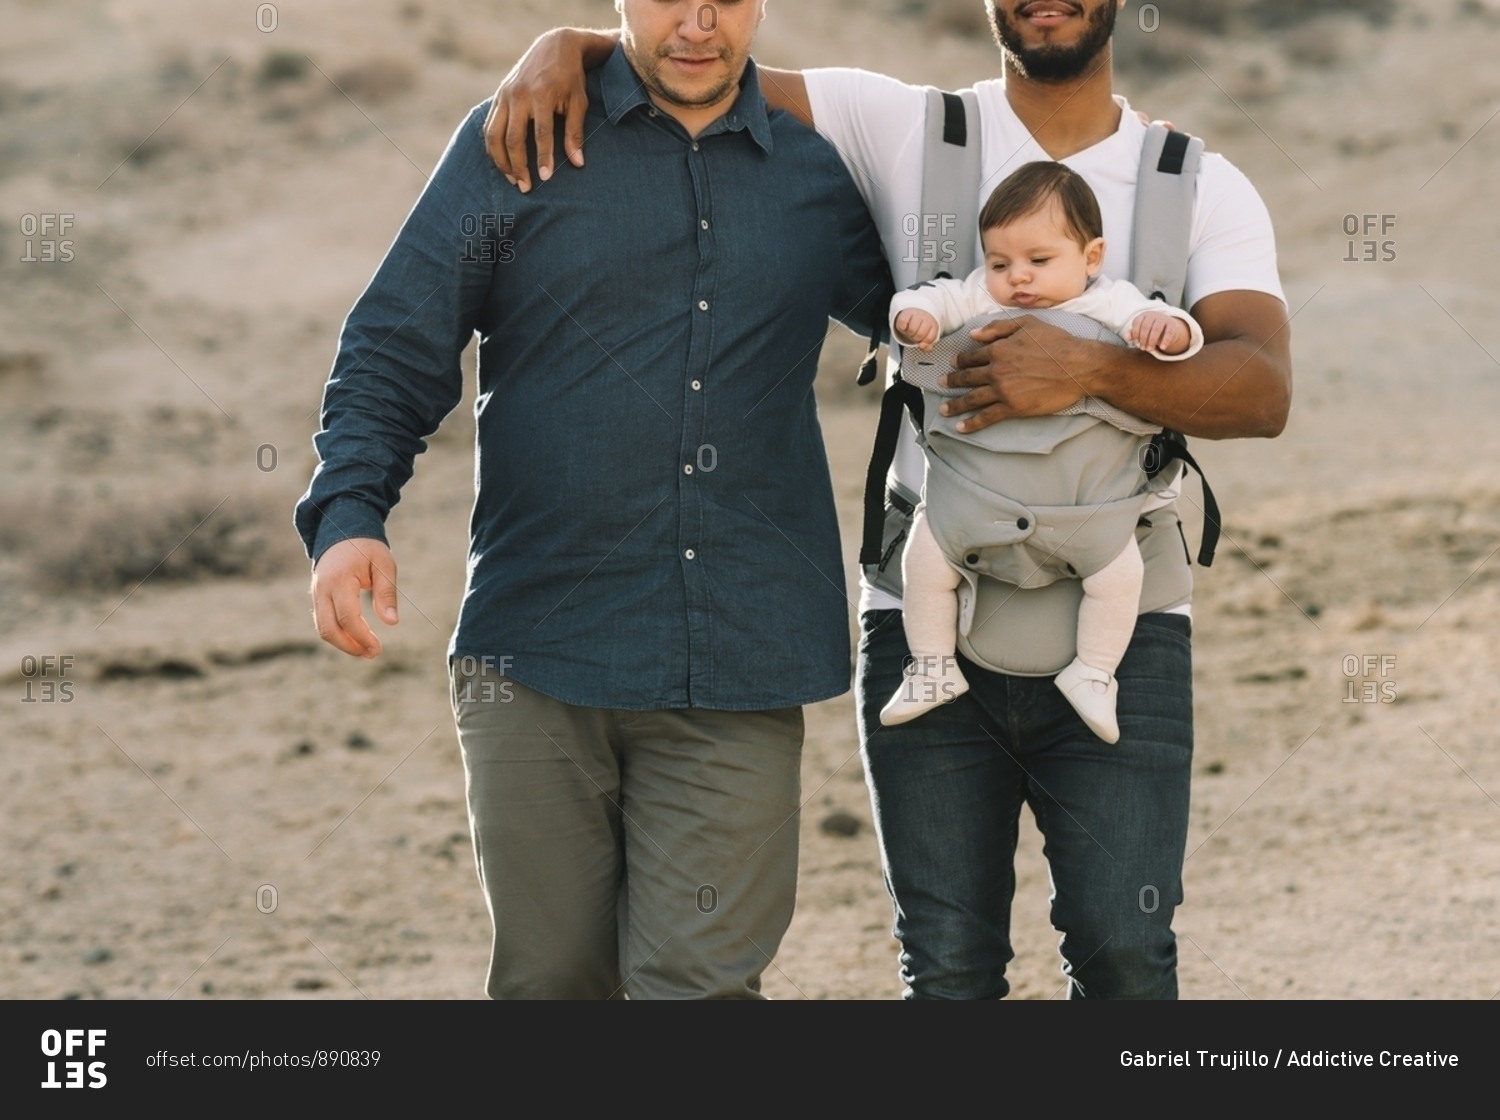 Crop black casual man holding on shoulder anonymous male boyfriend and holding little calm baby in grey carrier while strolling on nature at daytime